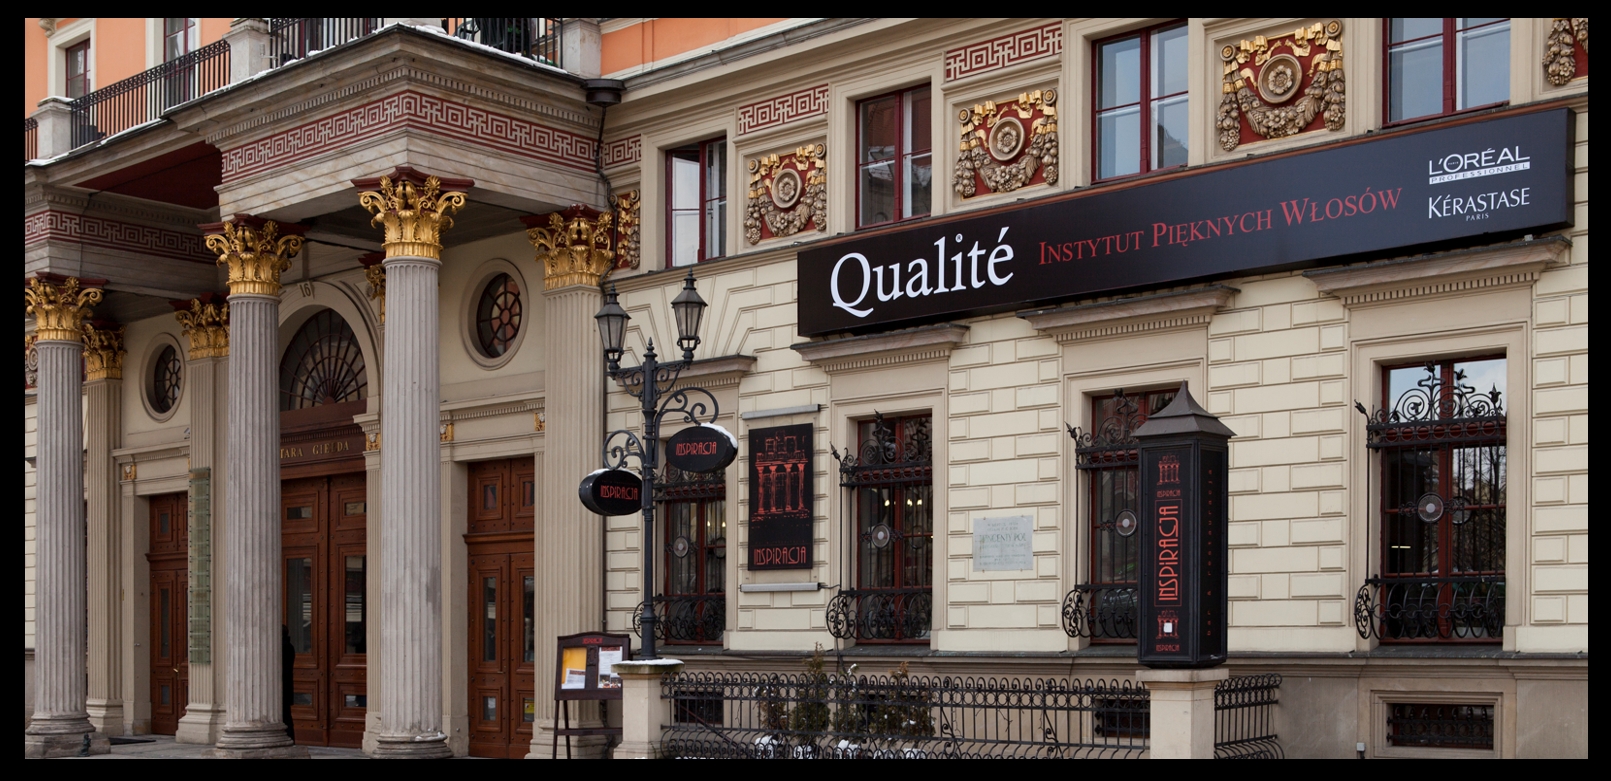 Hairdressers Qualite